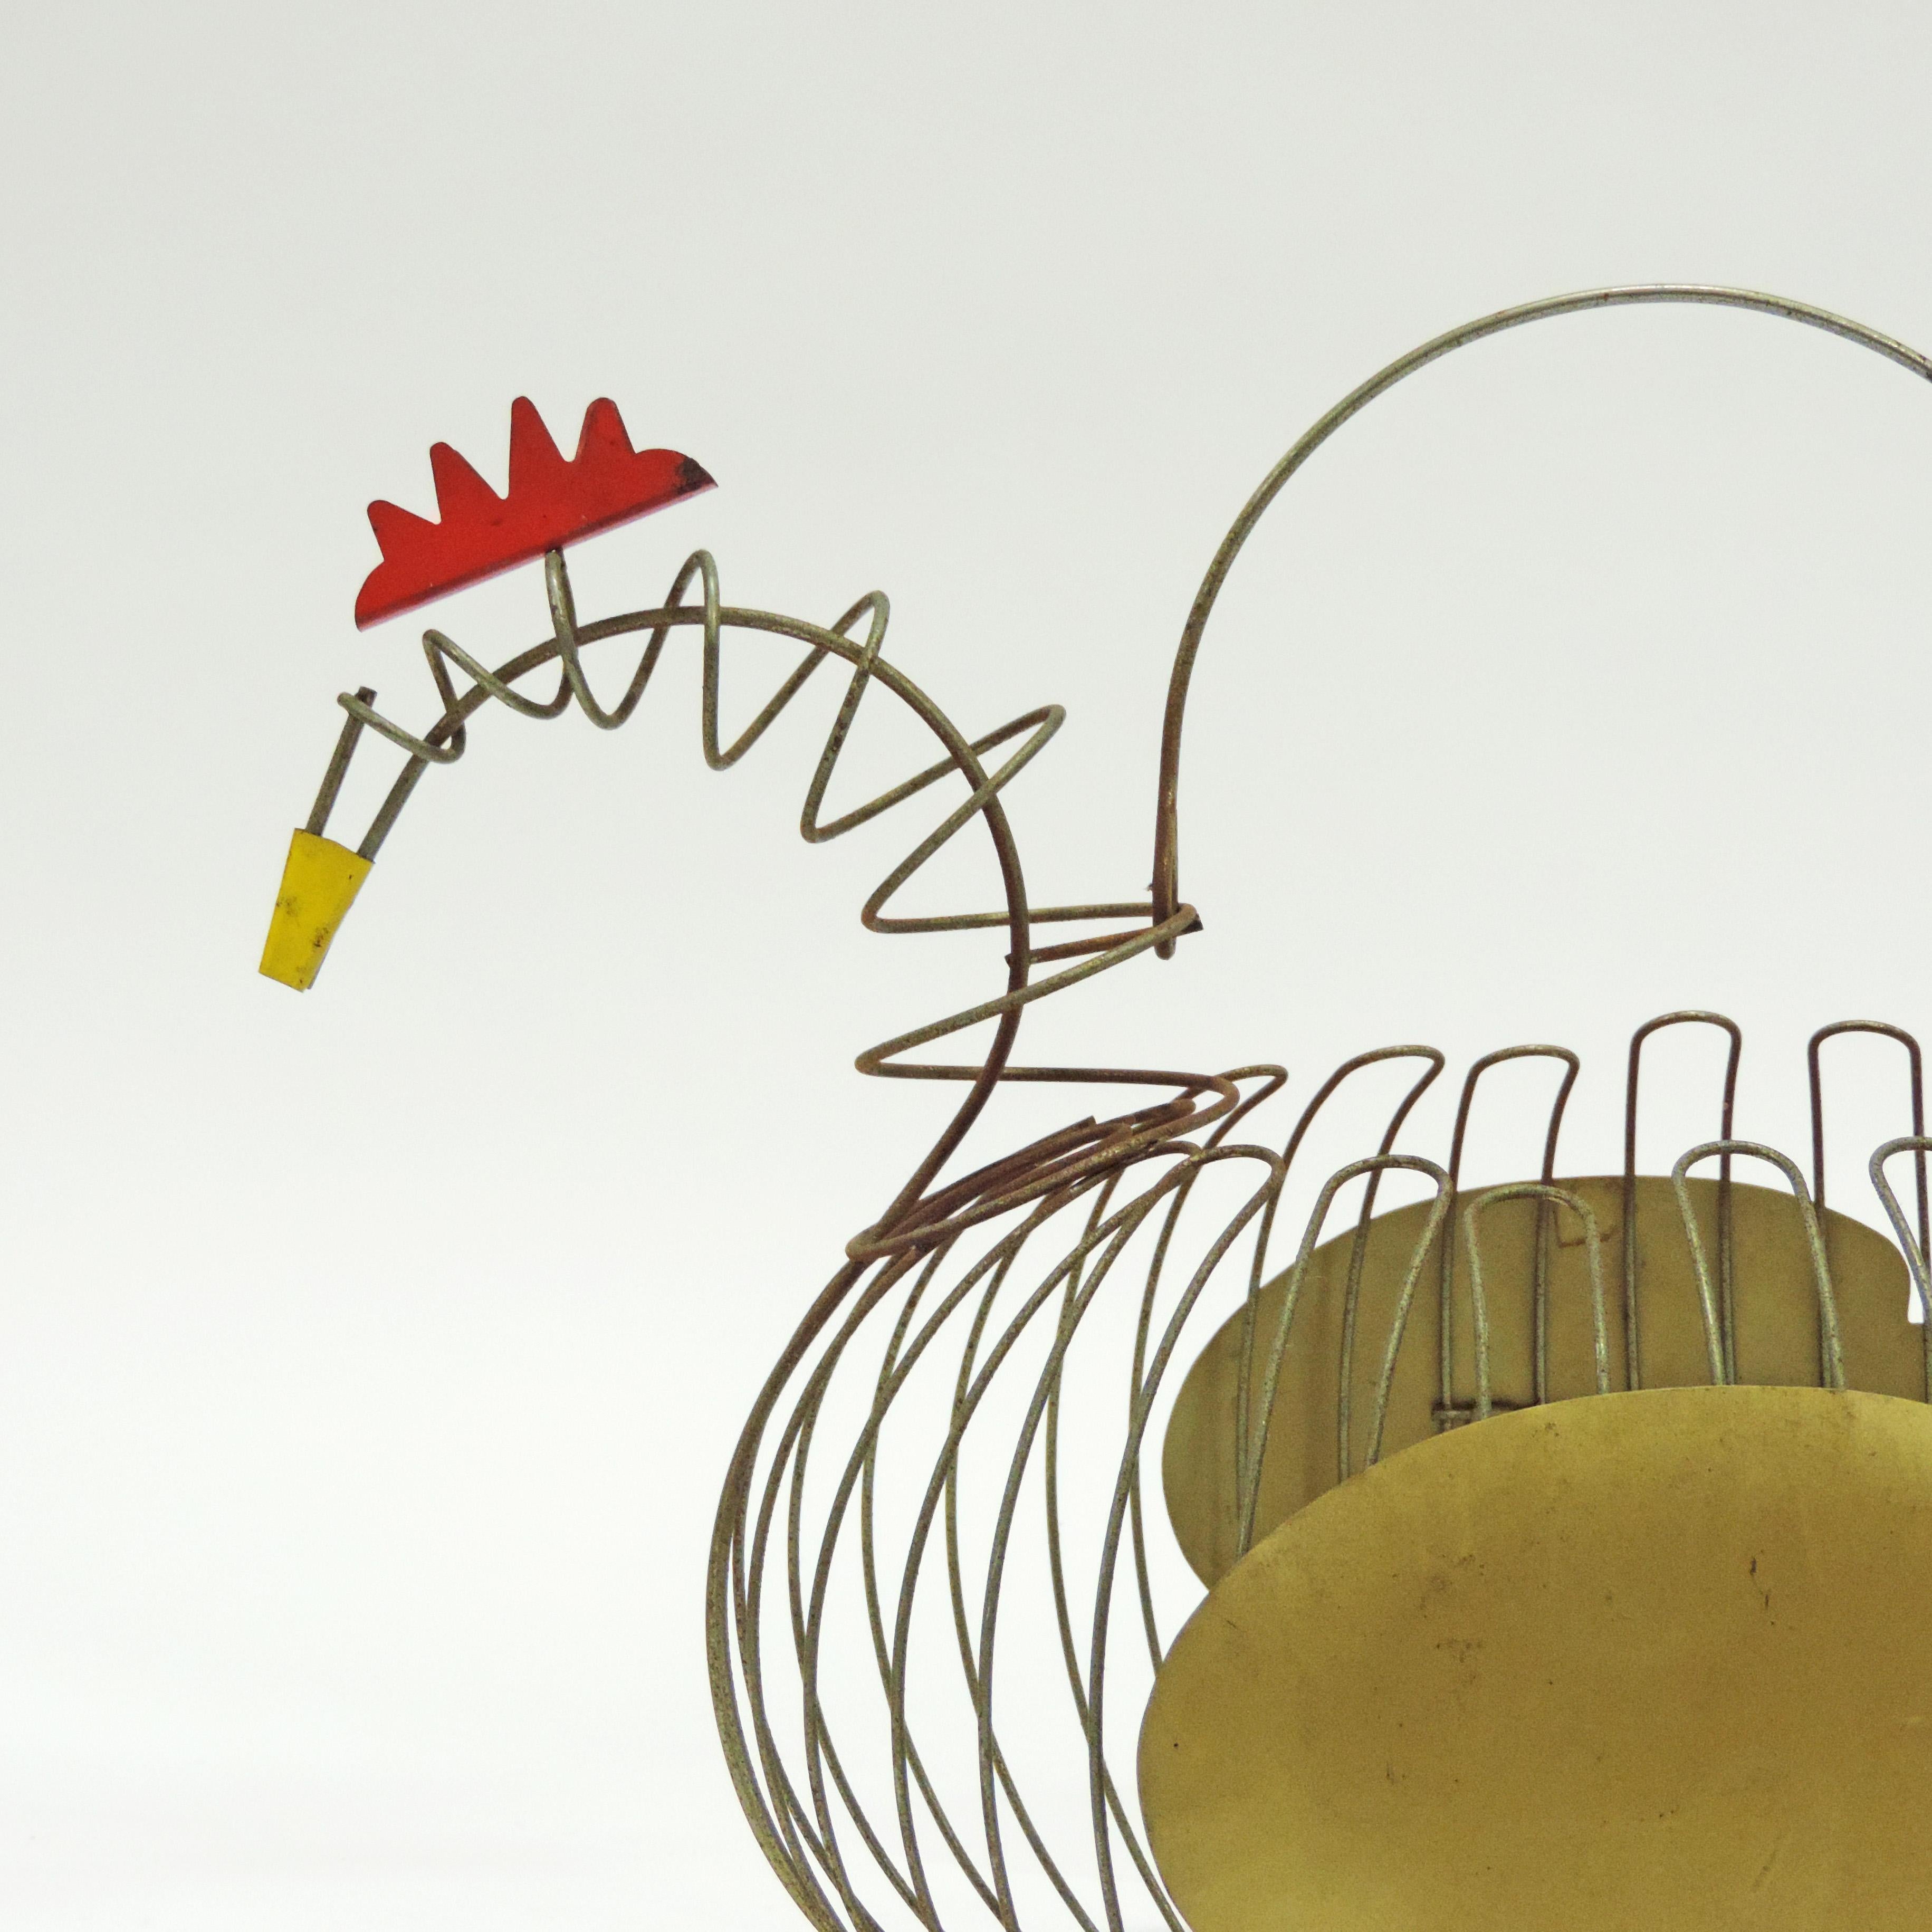 Vintage Italian 1950s egg basket in the shape of a chicken in metal wire and colored aluminium foil decoration.